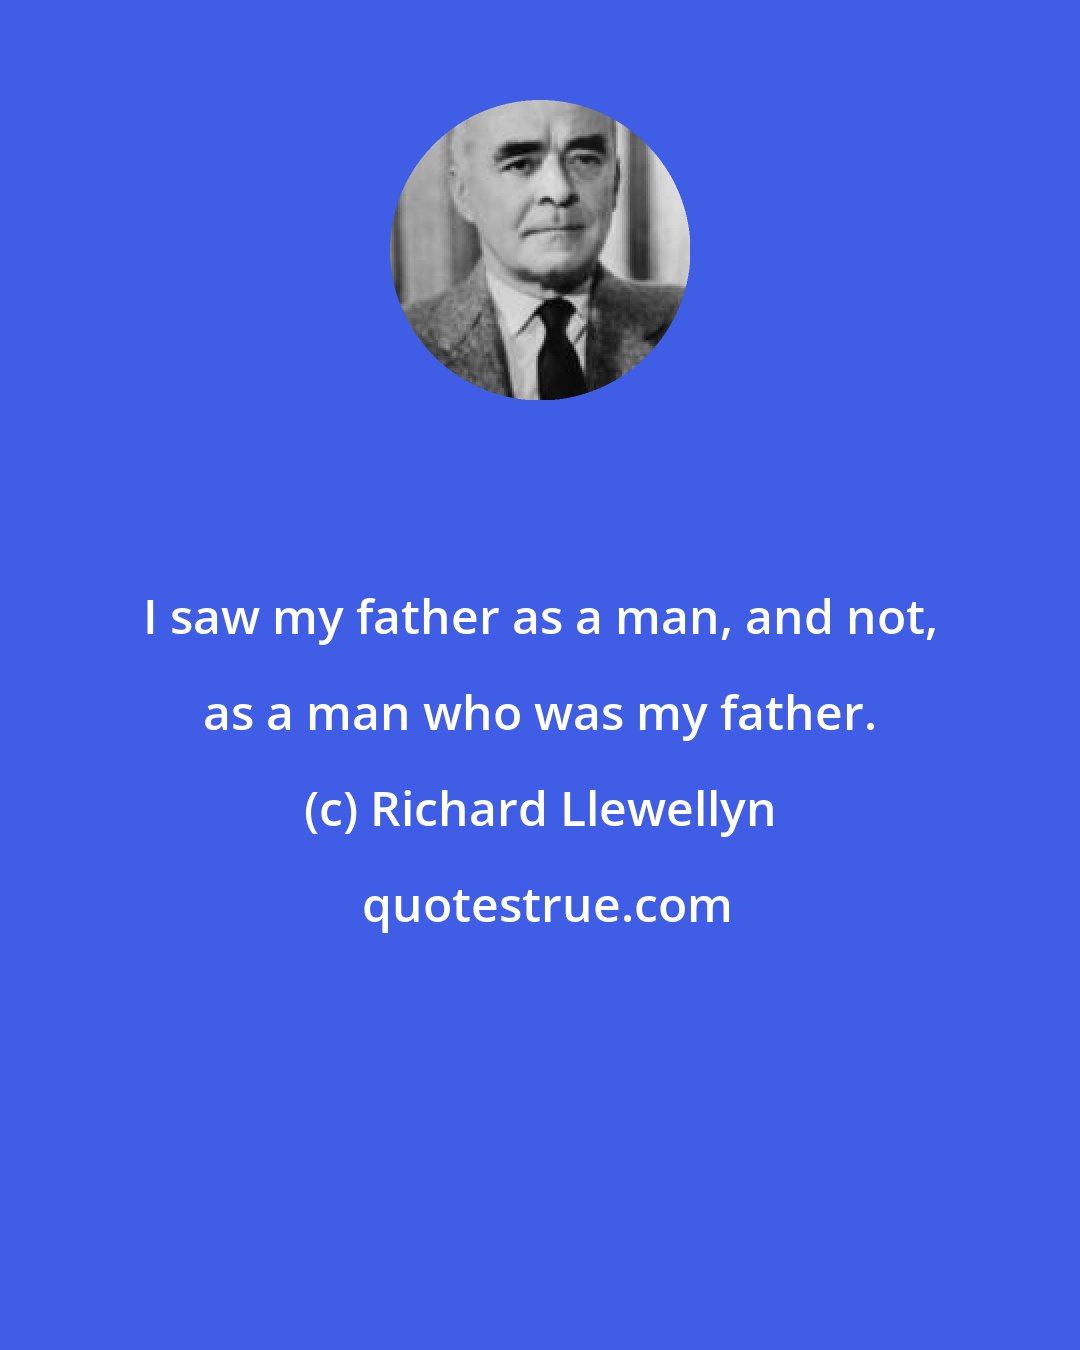 Richard Llewellyn: I saw my father as a man, and not, as a man who was my father.